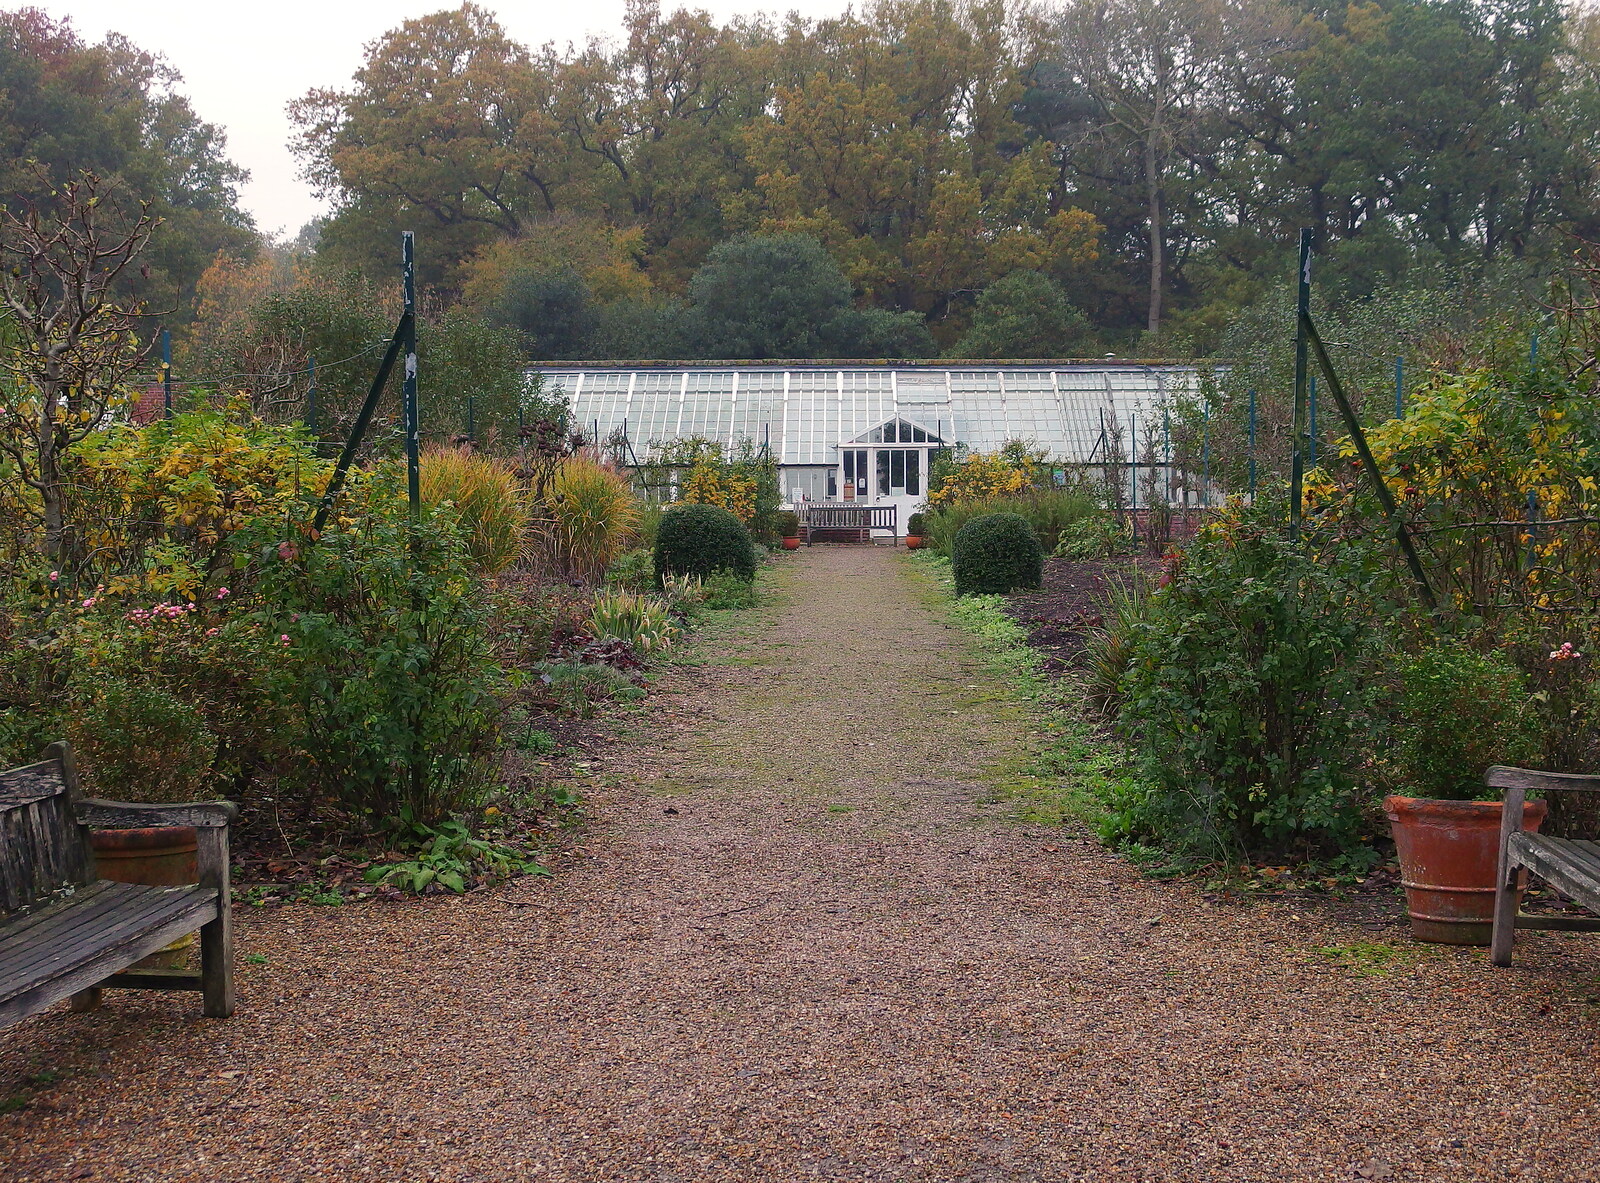 The walled garden is still closed from A November Miscellany and Building Progress, Thornham and Brome, Suffolk - 17th November 2013